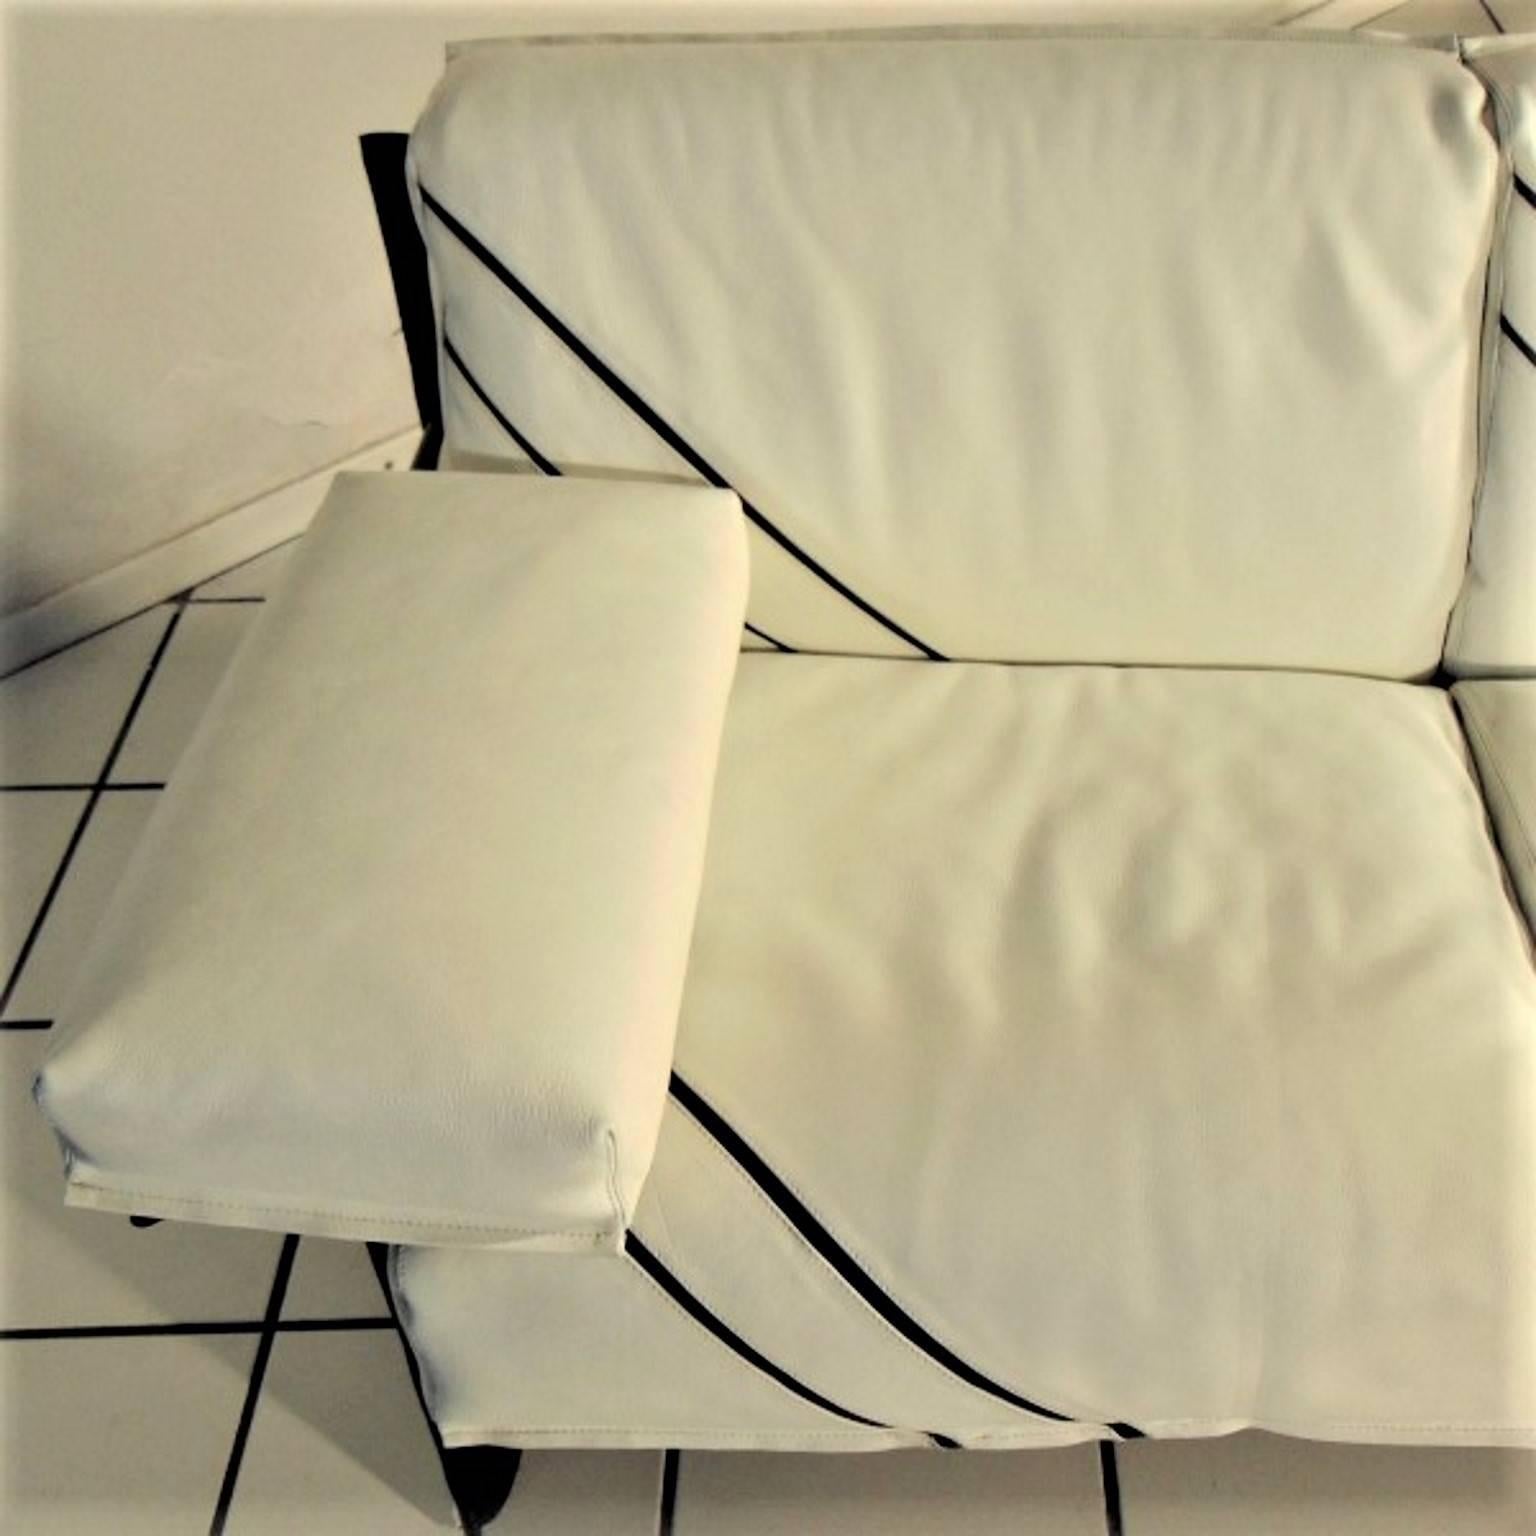 1981 Sormani White Leather Two-Seater Sofa with Black Inlays and Structure Italy 5